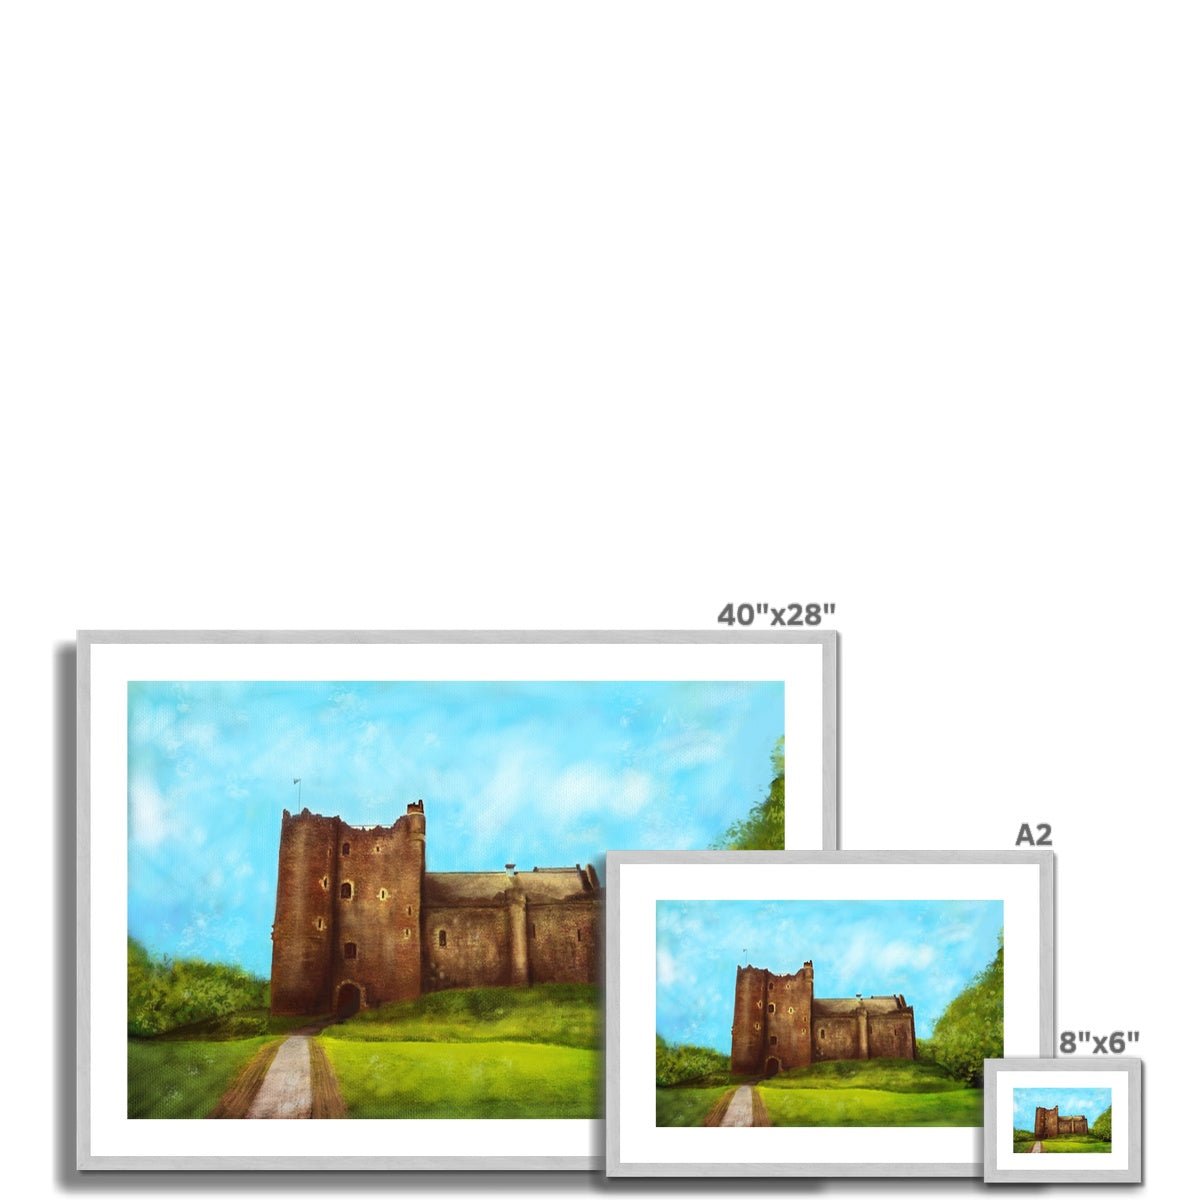 Doune Castle Painting | Antique Framed & Mounted Prints From Scotland-Antique Framed & Mounted Prints-Scottish Castles Art Gallery-Paintings, Prints, Homeware, Art Gifts From Scotland By Scottish Artist Kevin Hunter